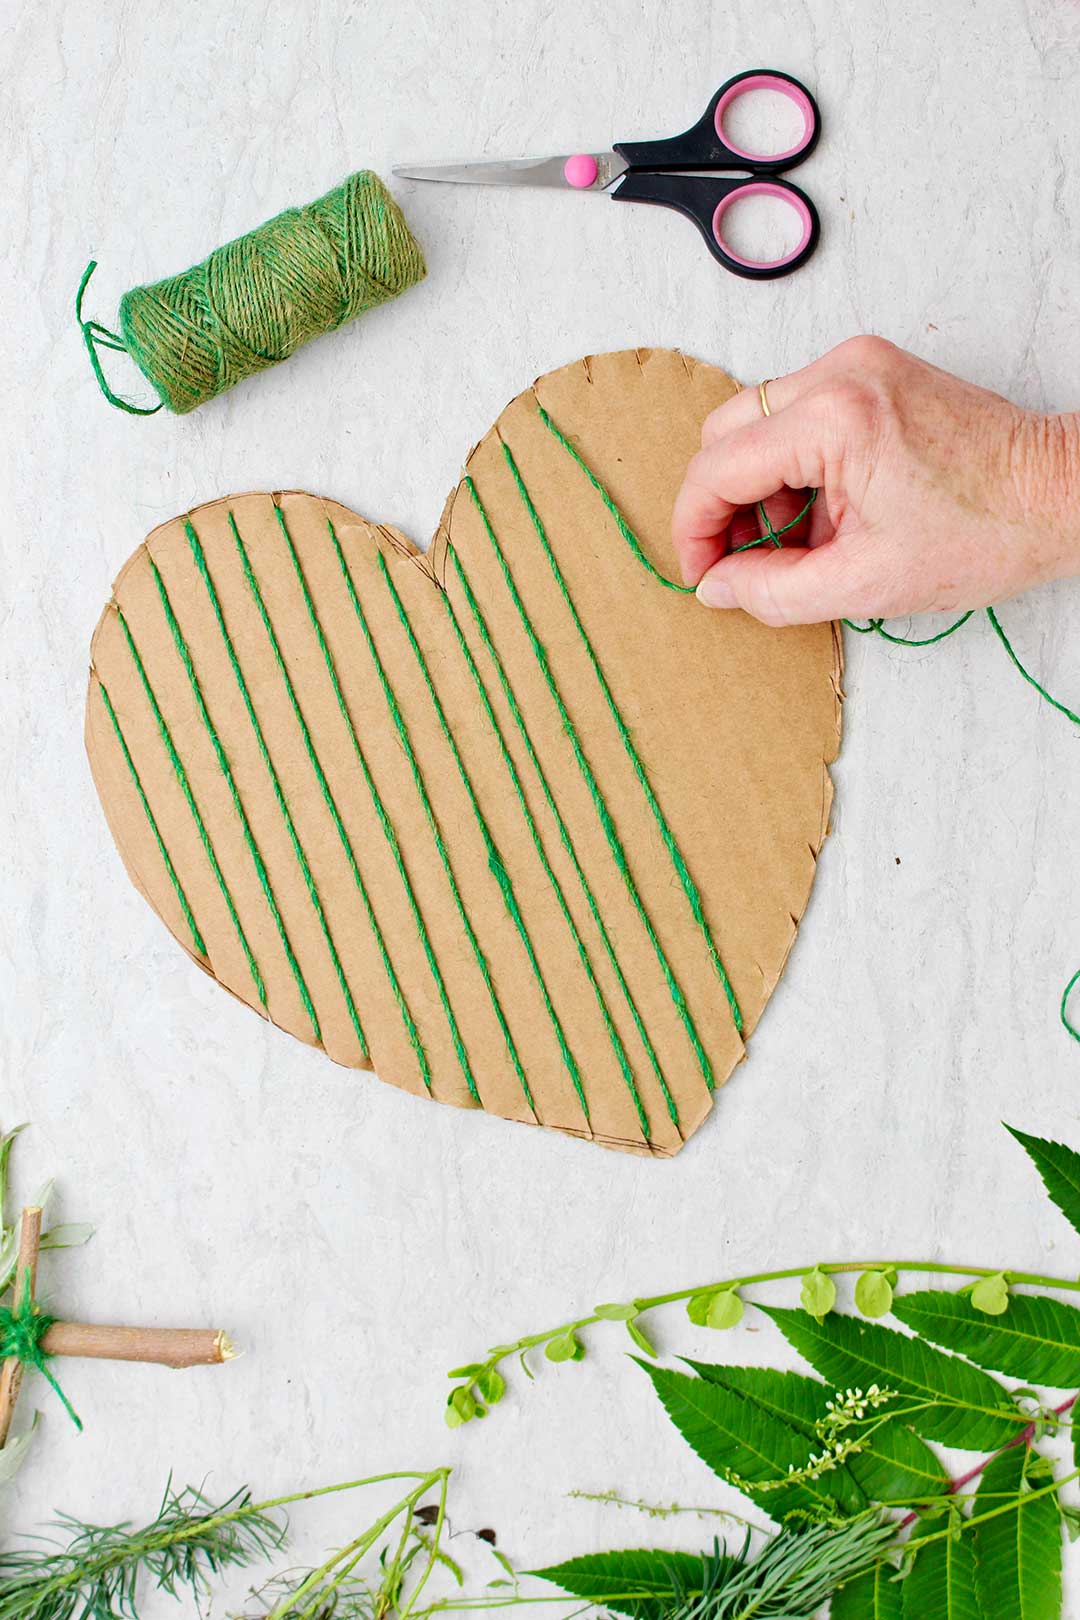 Hand securing green string on heart shaped cardboard.